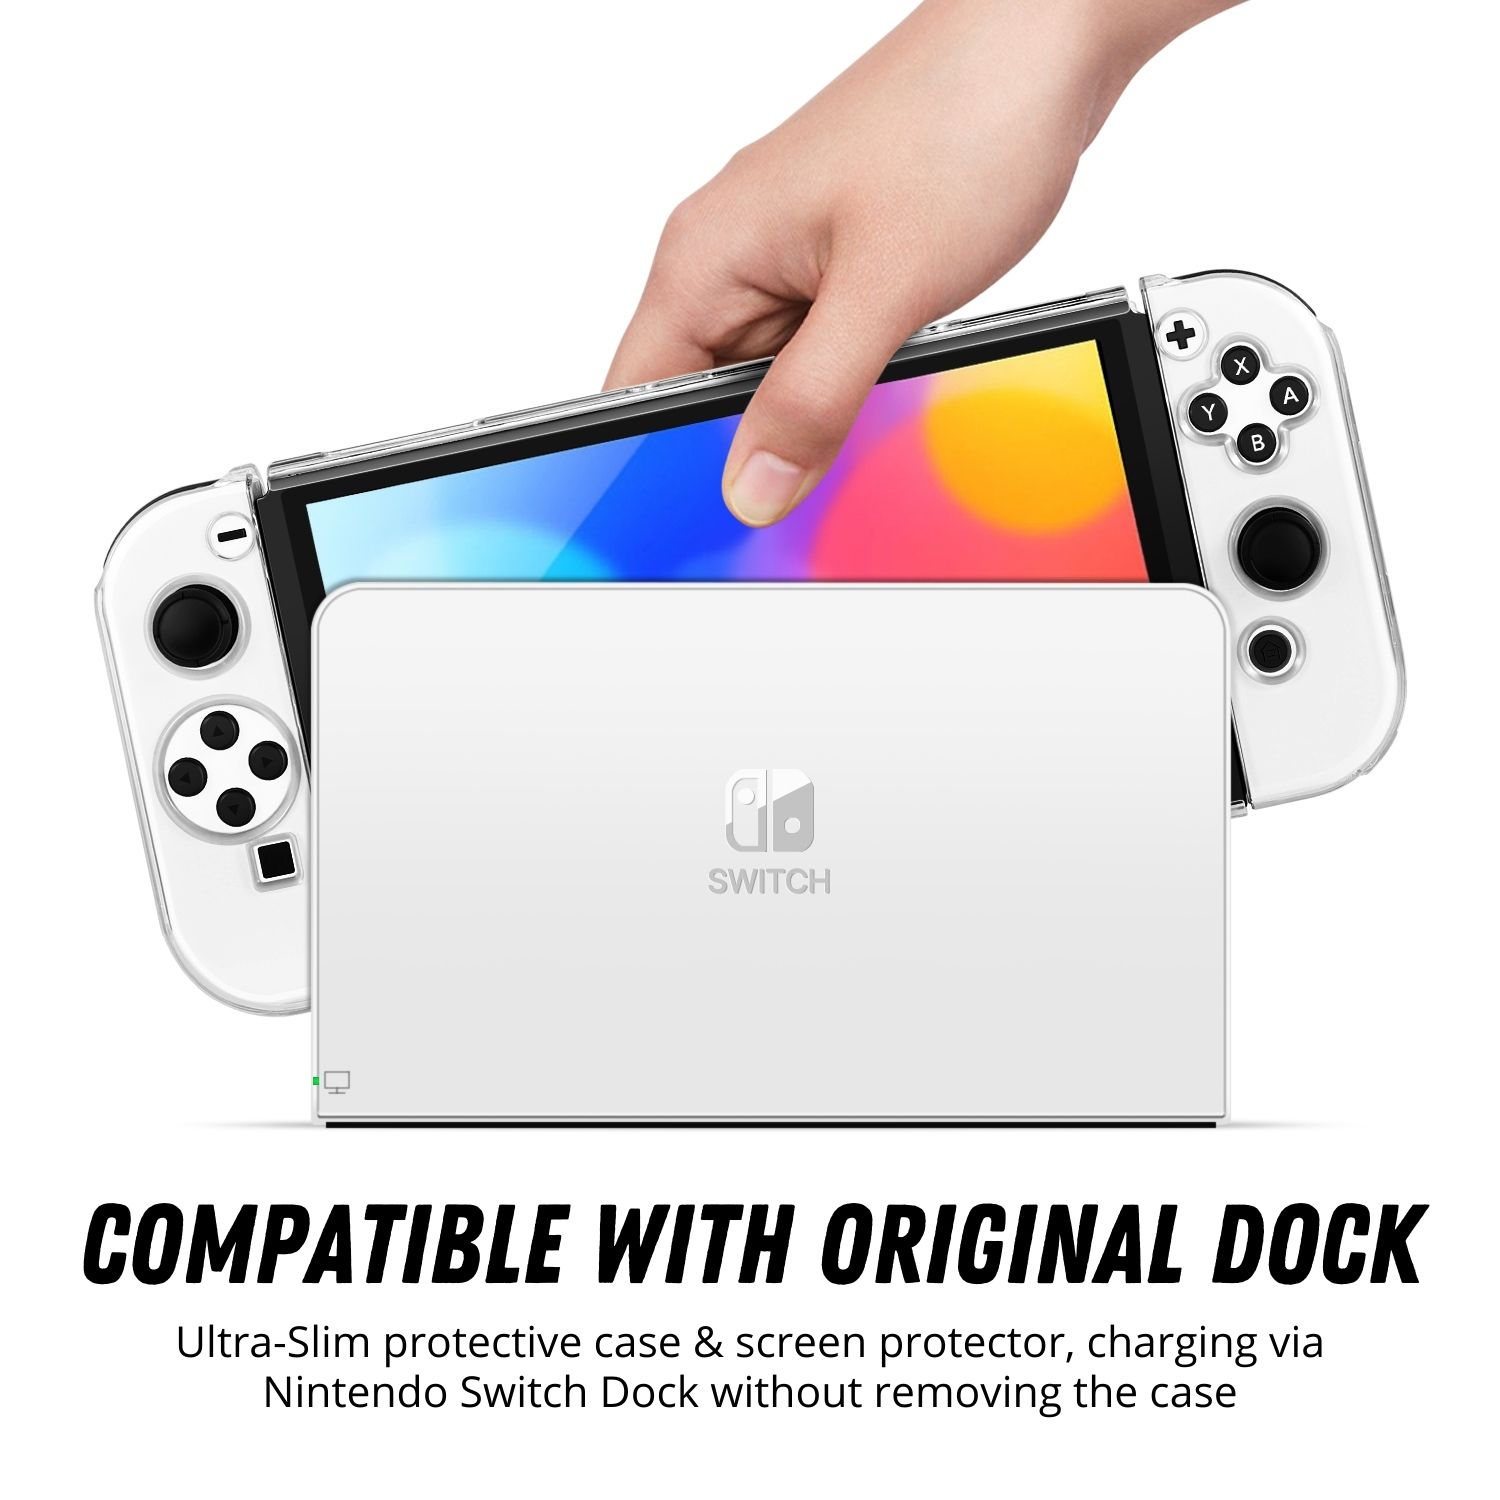 Switch OLED Dockable Case - The ultra-slim and lightweight design make it easy to charge your device without removing the case every time. The OLED case allows the joy-cons to be removed without taking off the entire case.